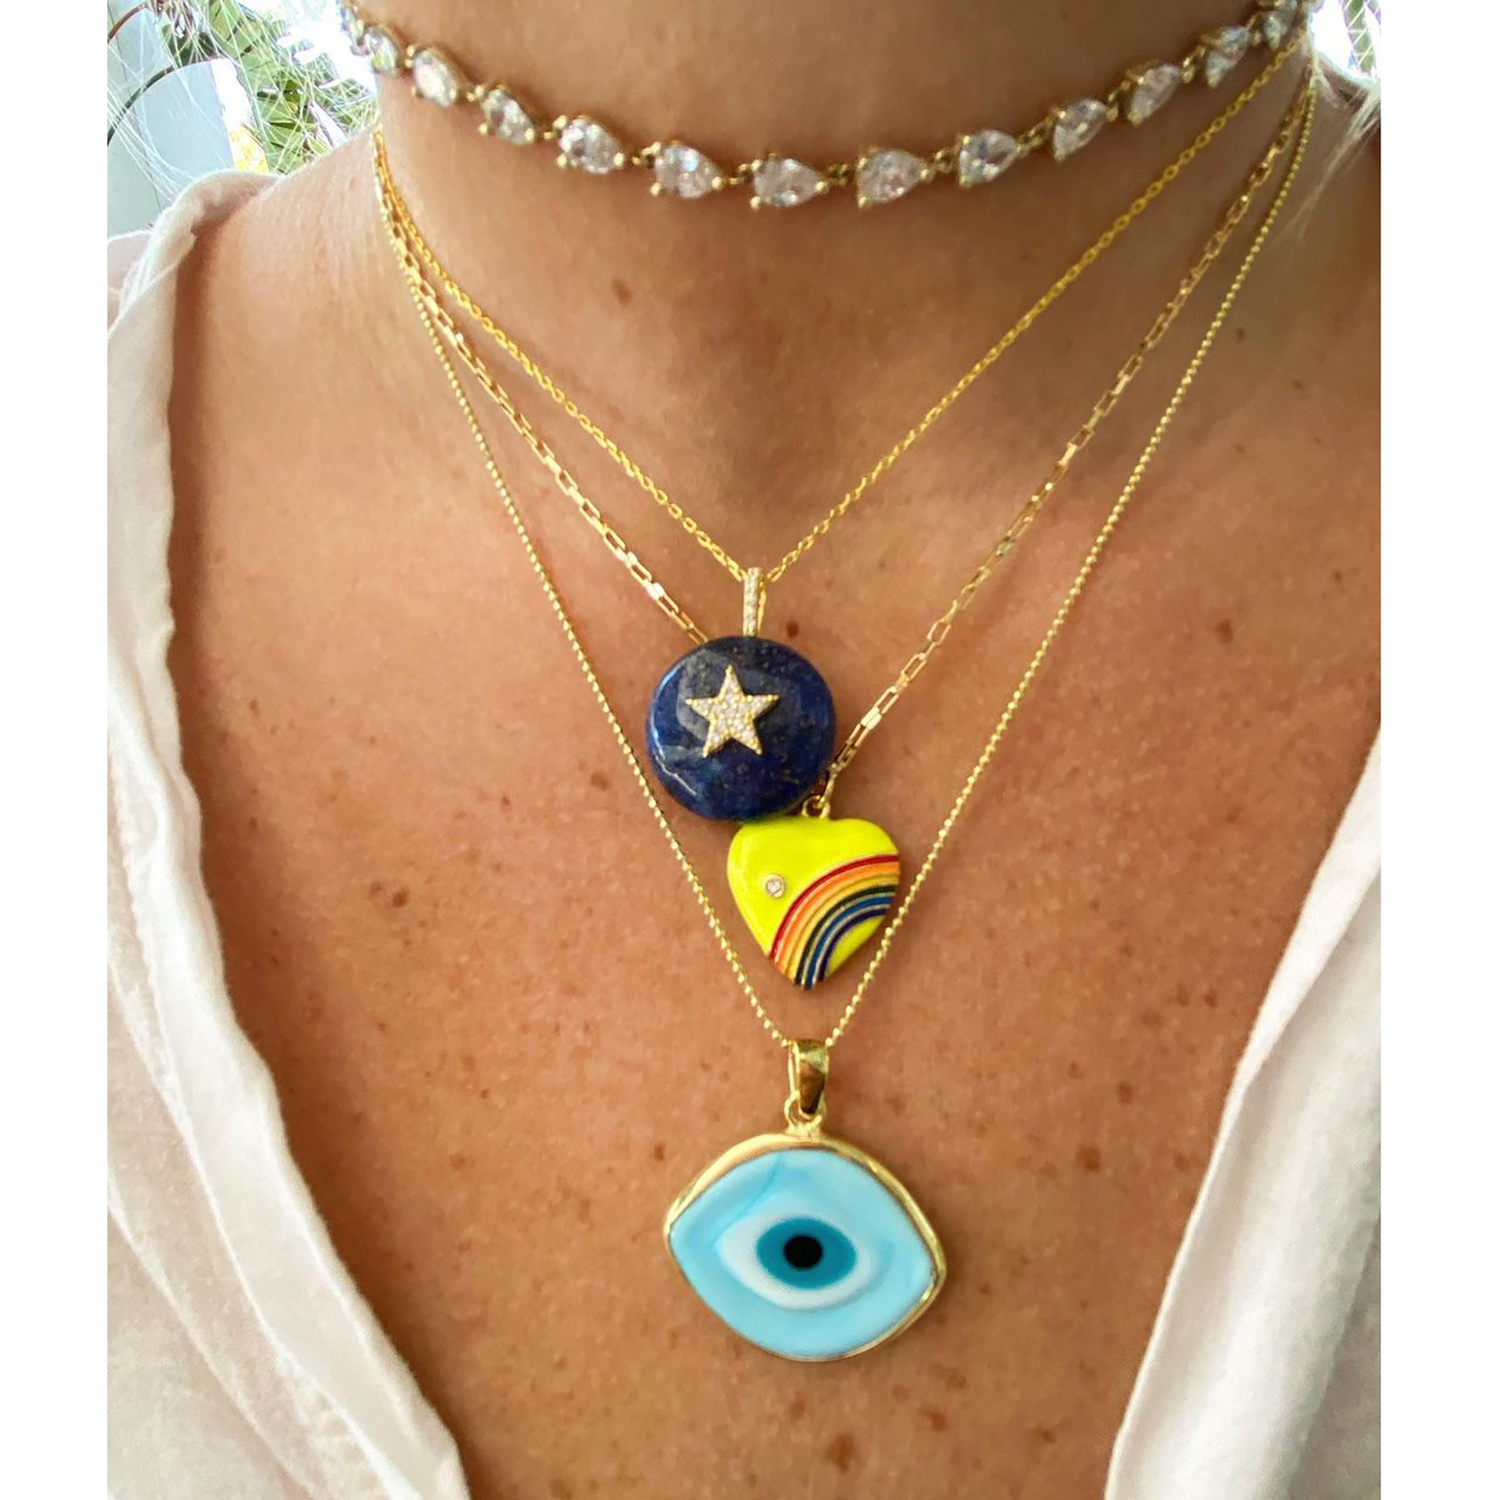 HEALLILY Evil Eye Link Chain Evil Eye Beads Lucky Charms Turkish Eye Charm  for Bracelet Necklace Jewelry Making Eyeglass Chains : Amazon.in: Jewellery